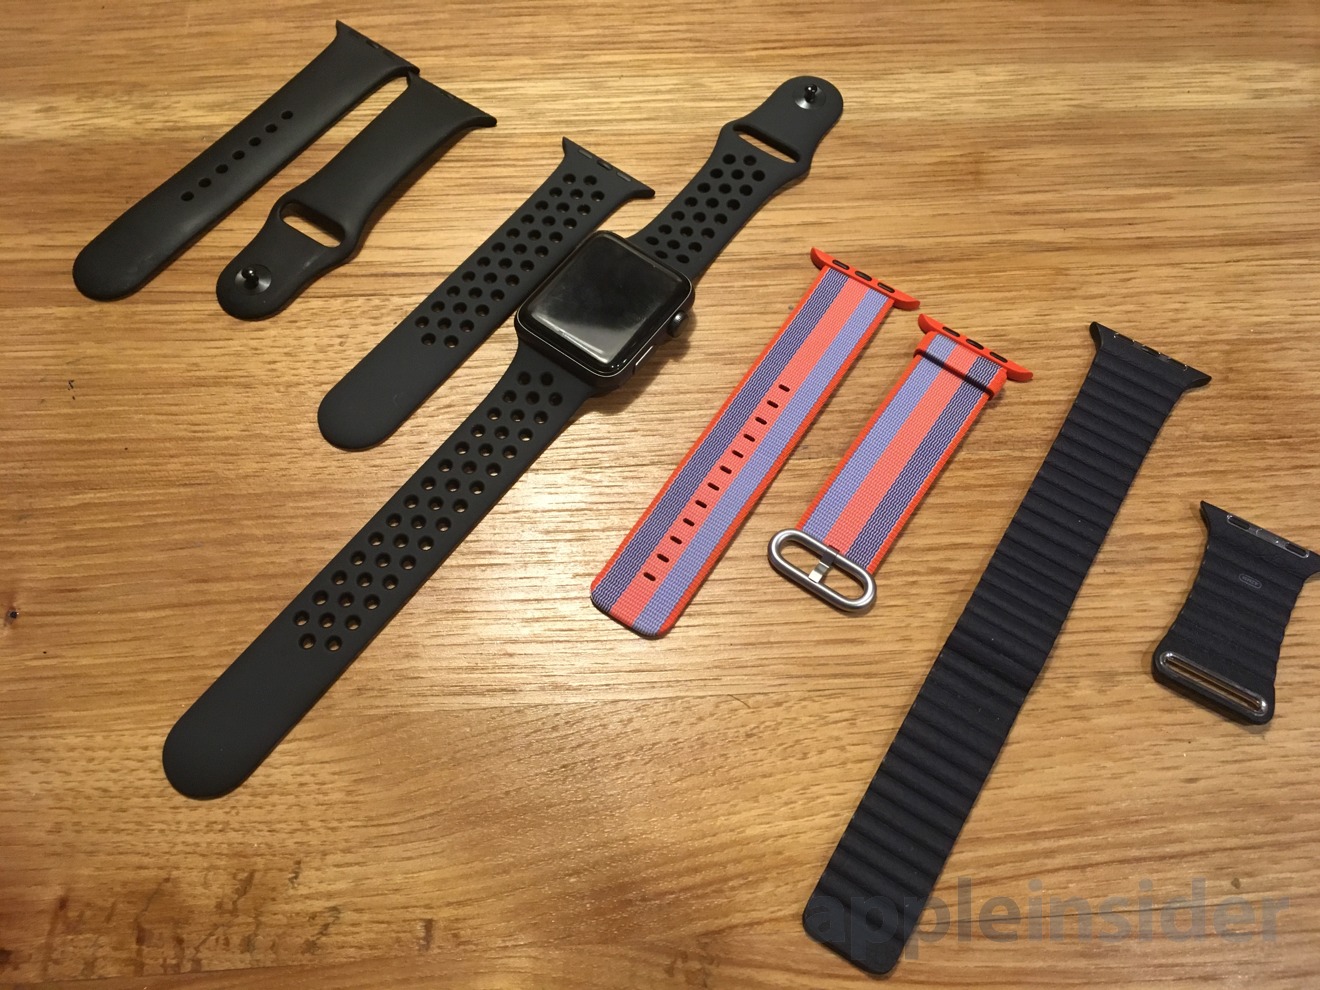 anthracite nike sport band